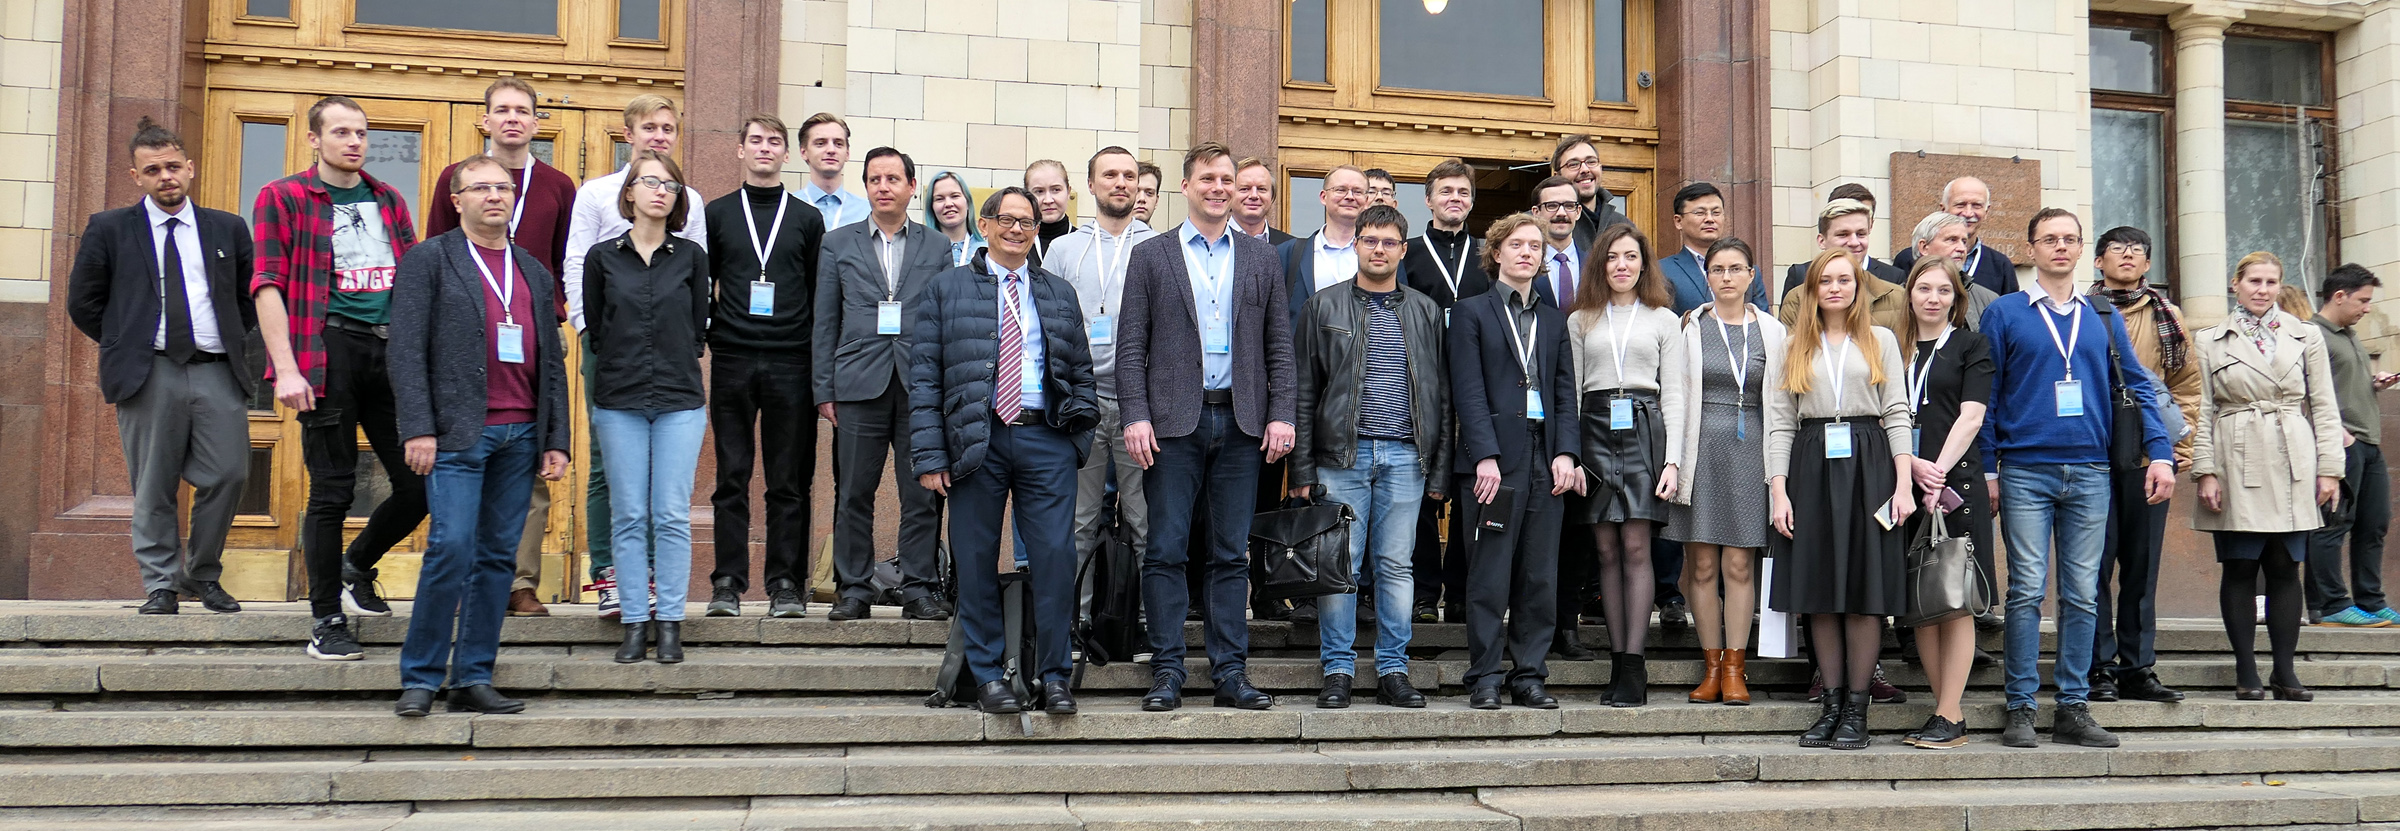 The first international conference on perovskite photovoltaics MAPPIC-2019 was held at Moscow State University